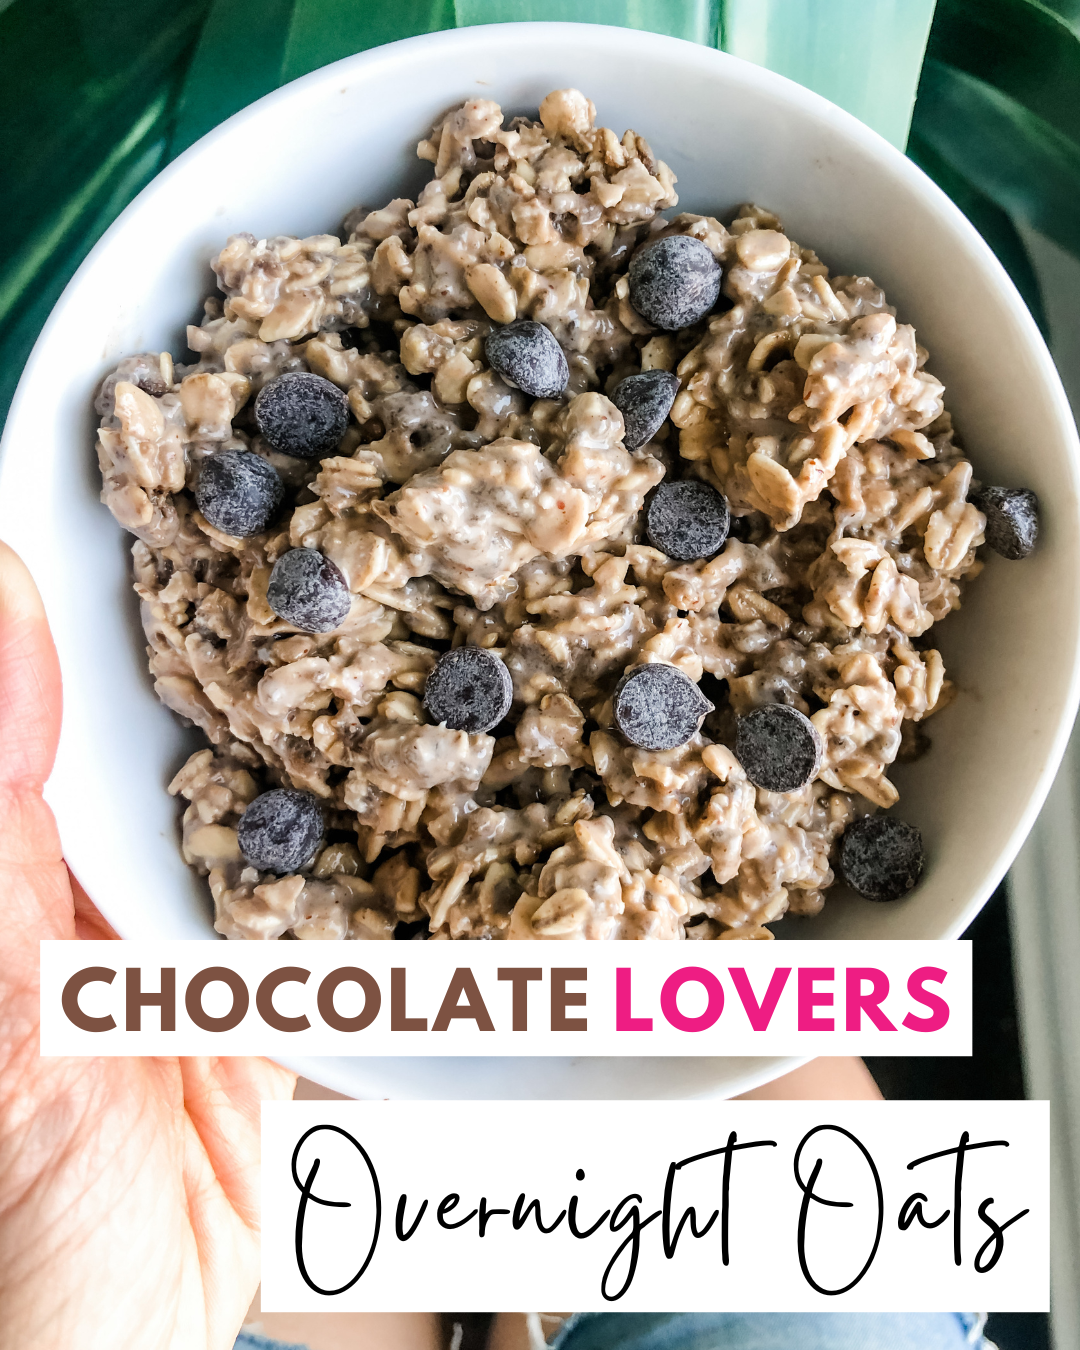 How to Make Chocolate Lover's Overnight Oats